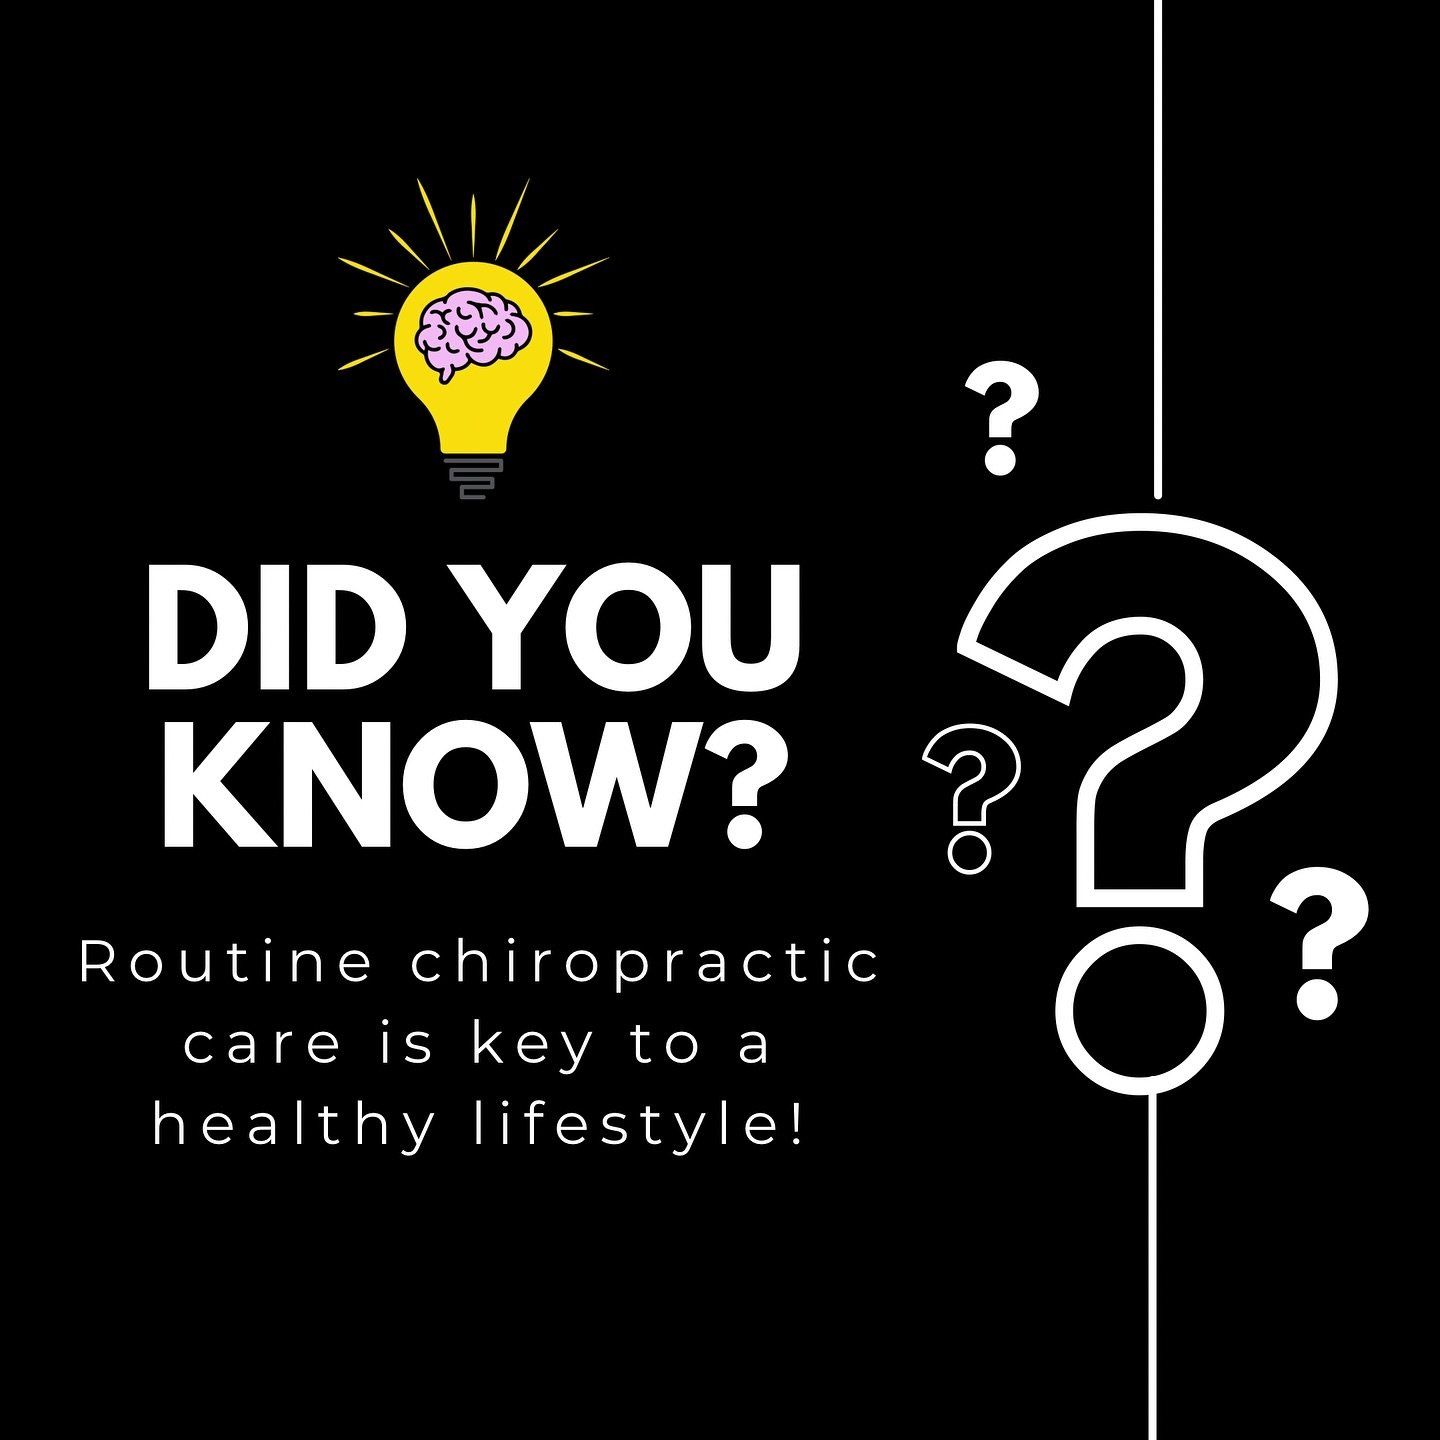 We live in a day and age where we demand a lot from our bodies. 

Everyone associates chiropractic care with pain relief. And sure, even though pain relief from joint restrictions is one of the benefits of chiropractic care there&rsquo;s much more to